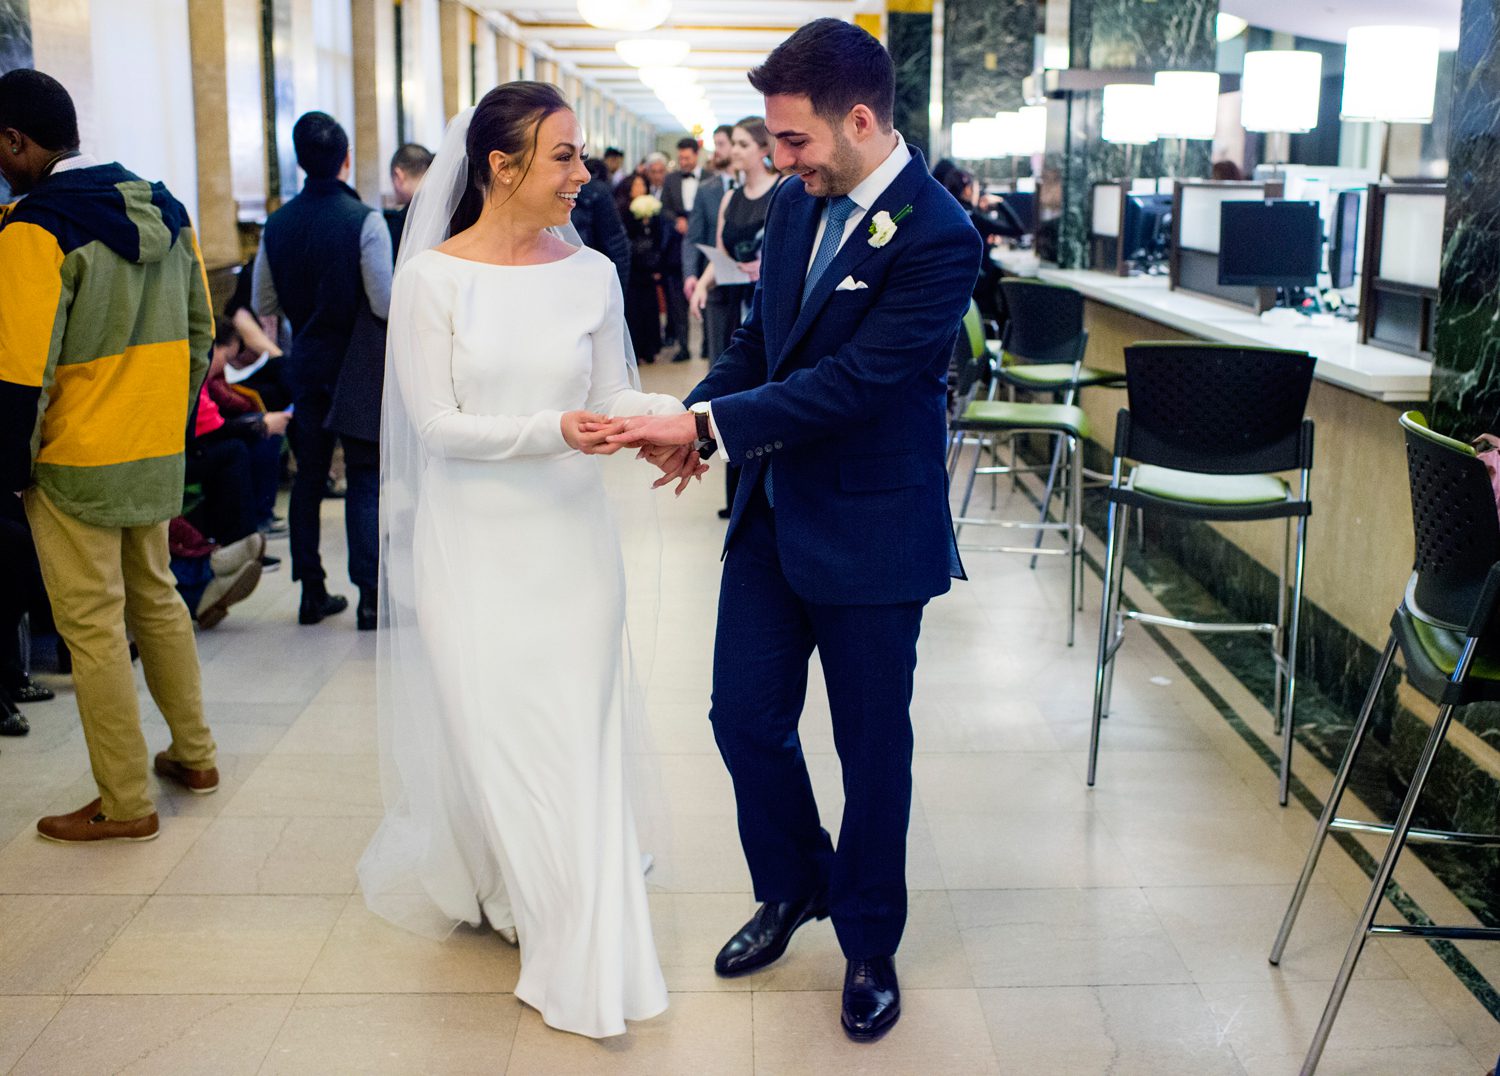 How to Get Married at City Hall 